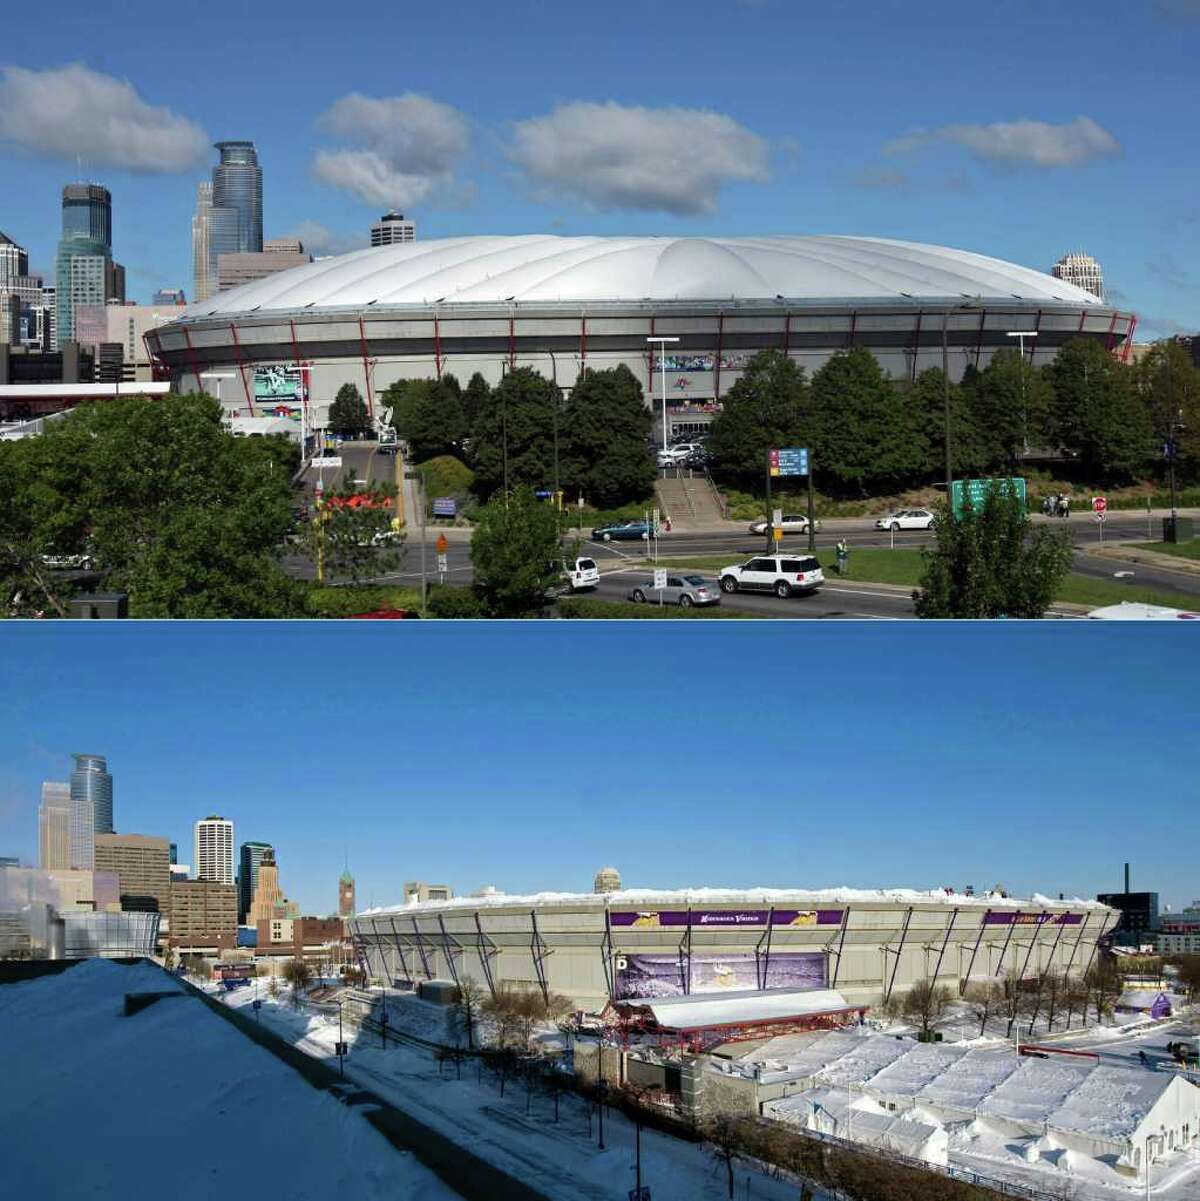 MINNEAPOLIS, MN - DECEMBER 12: This photo composite shows Hubert H. Humphrey Metrodome, Mall of America Stadium before (above) and after it's inflatable roof collapsed under the weight of snow and during a storm Sunday morning December 12, 2010 in Minneapolis, Minnesota. A blizzard dumped more than 20 inches of snow in parts of the Midwest forcing the NFL football game between the New York Giants and the Minnesota Vikings to be postponed till Monday and will be played in Detroit's Ford Field. There were no injuries reported from the collapse of the dome. (Photos by Doug Pensinger (above) and Tom Dahlin/Getty Images)